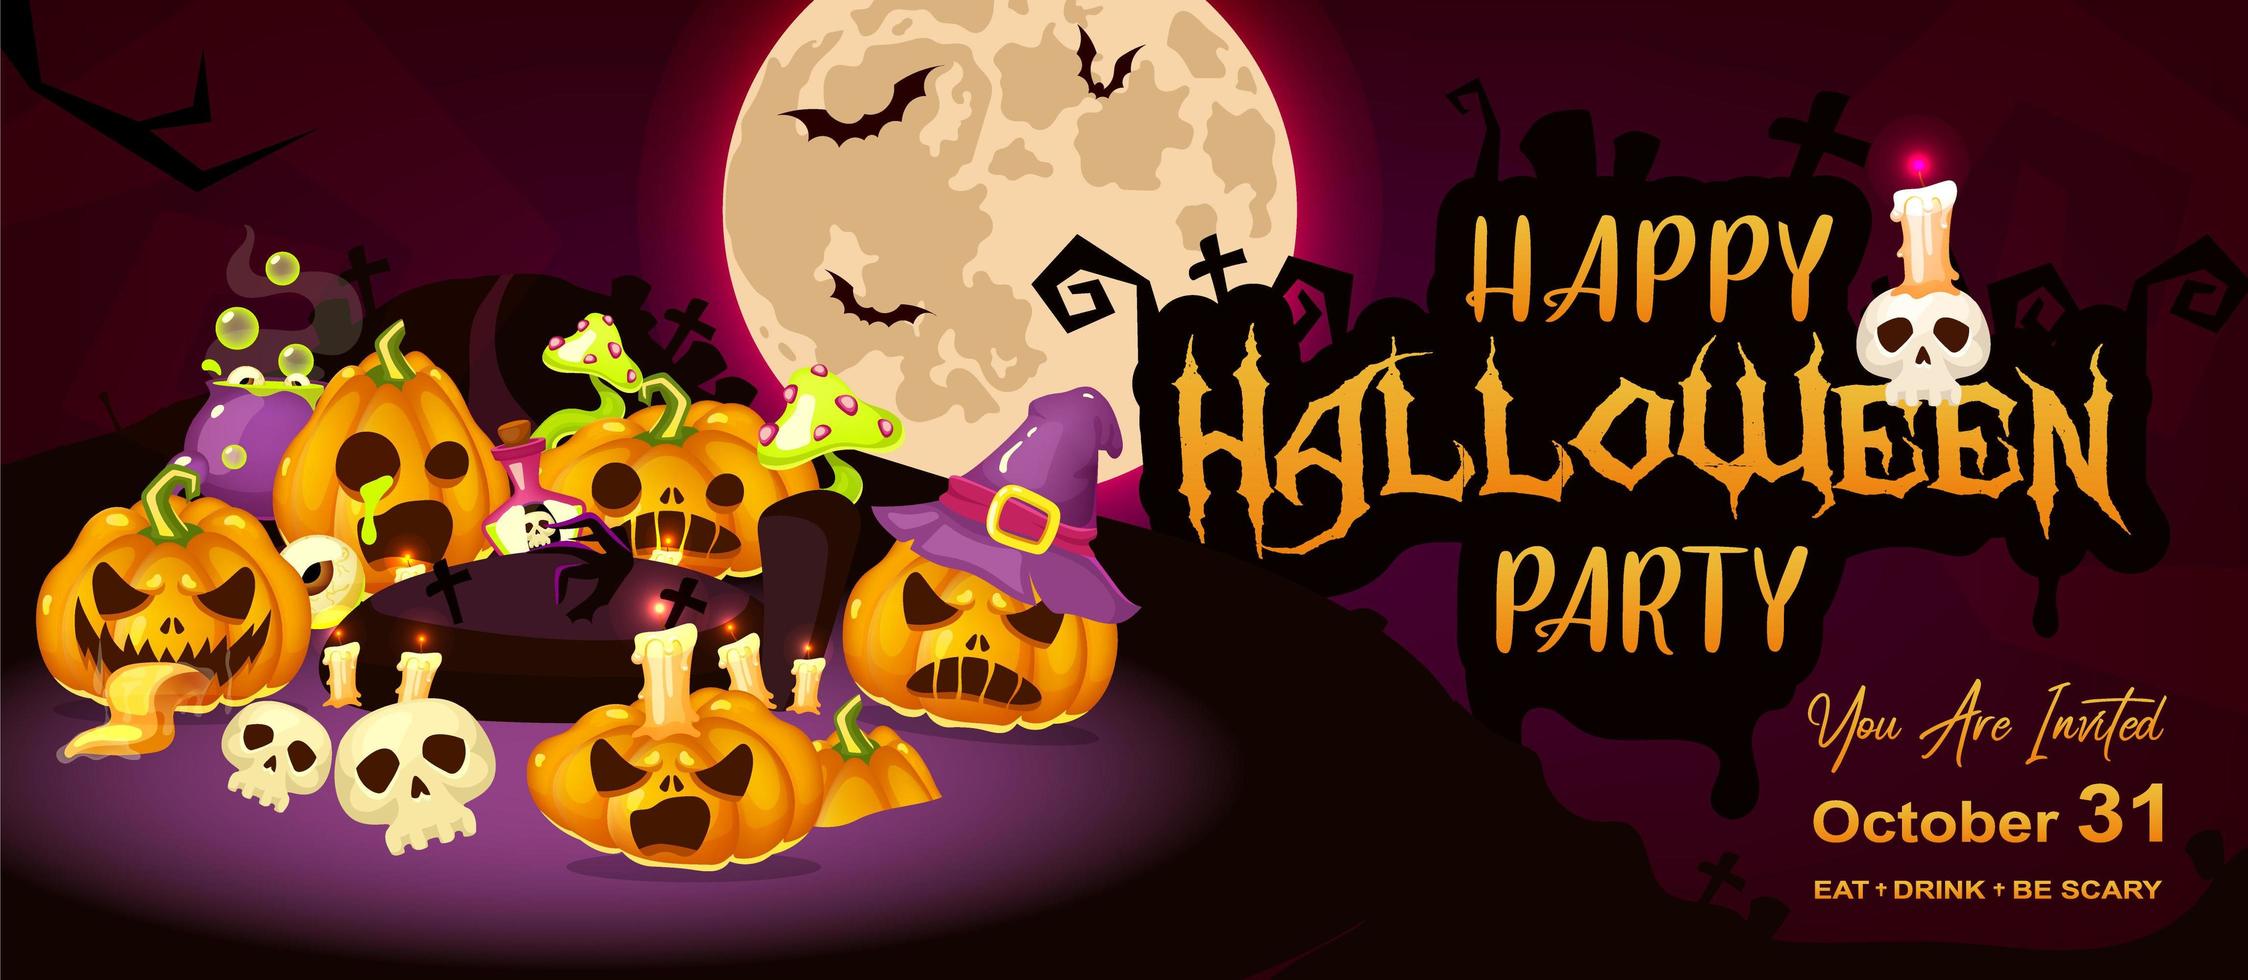 Happy halloween event flat banner template. Autumn holiday night party invitation card design layout. Spooky cartoon background with scary pumpkins, moon and lettering. Helloween horizontal poster vector